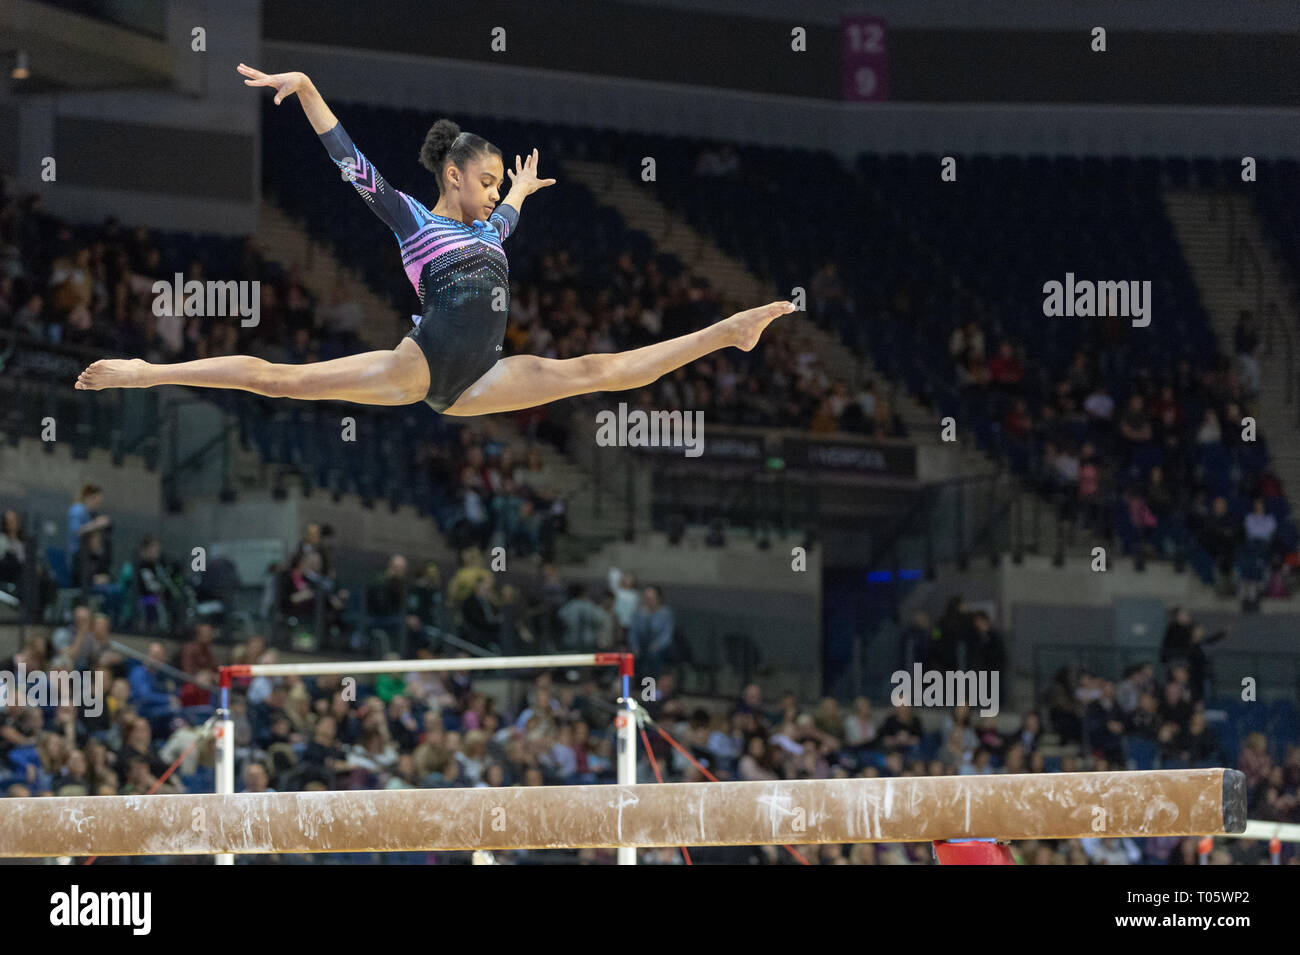 Liverpool, UK. 17th March 2019. Ondine Achampong of Sapphire competing at the Men’s and Women’s Artistic British Championships 2019, M&S Bank Arena, Liverpool, UK. Credit: Iain Scott Photography/Alamy Live News Stock Photo